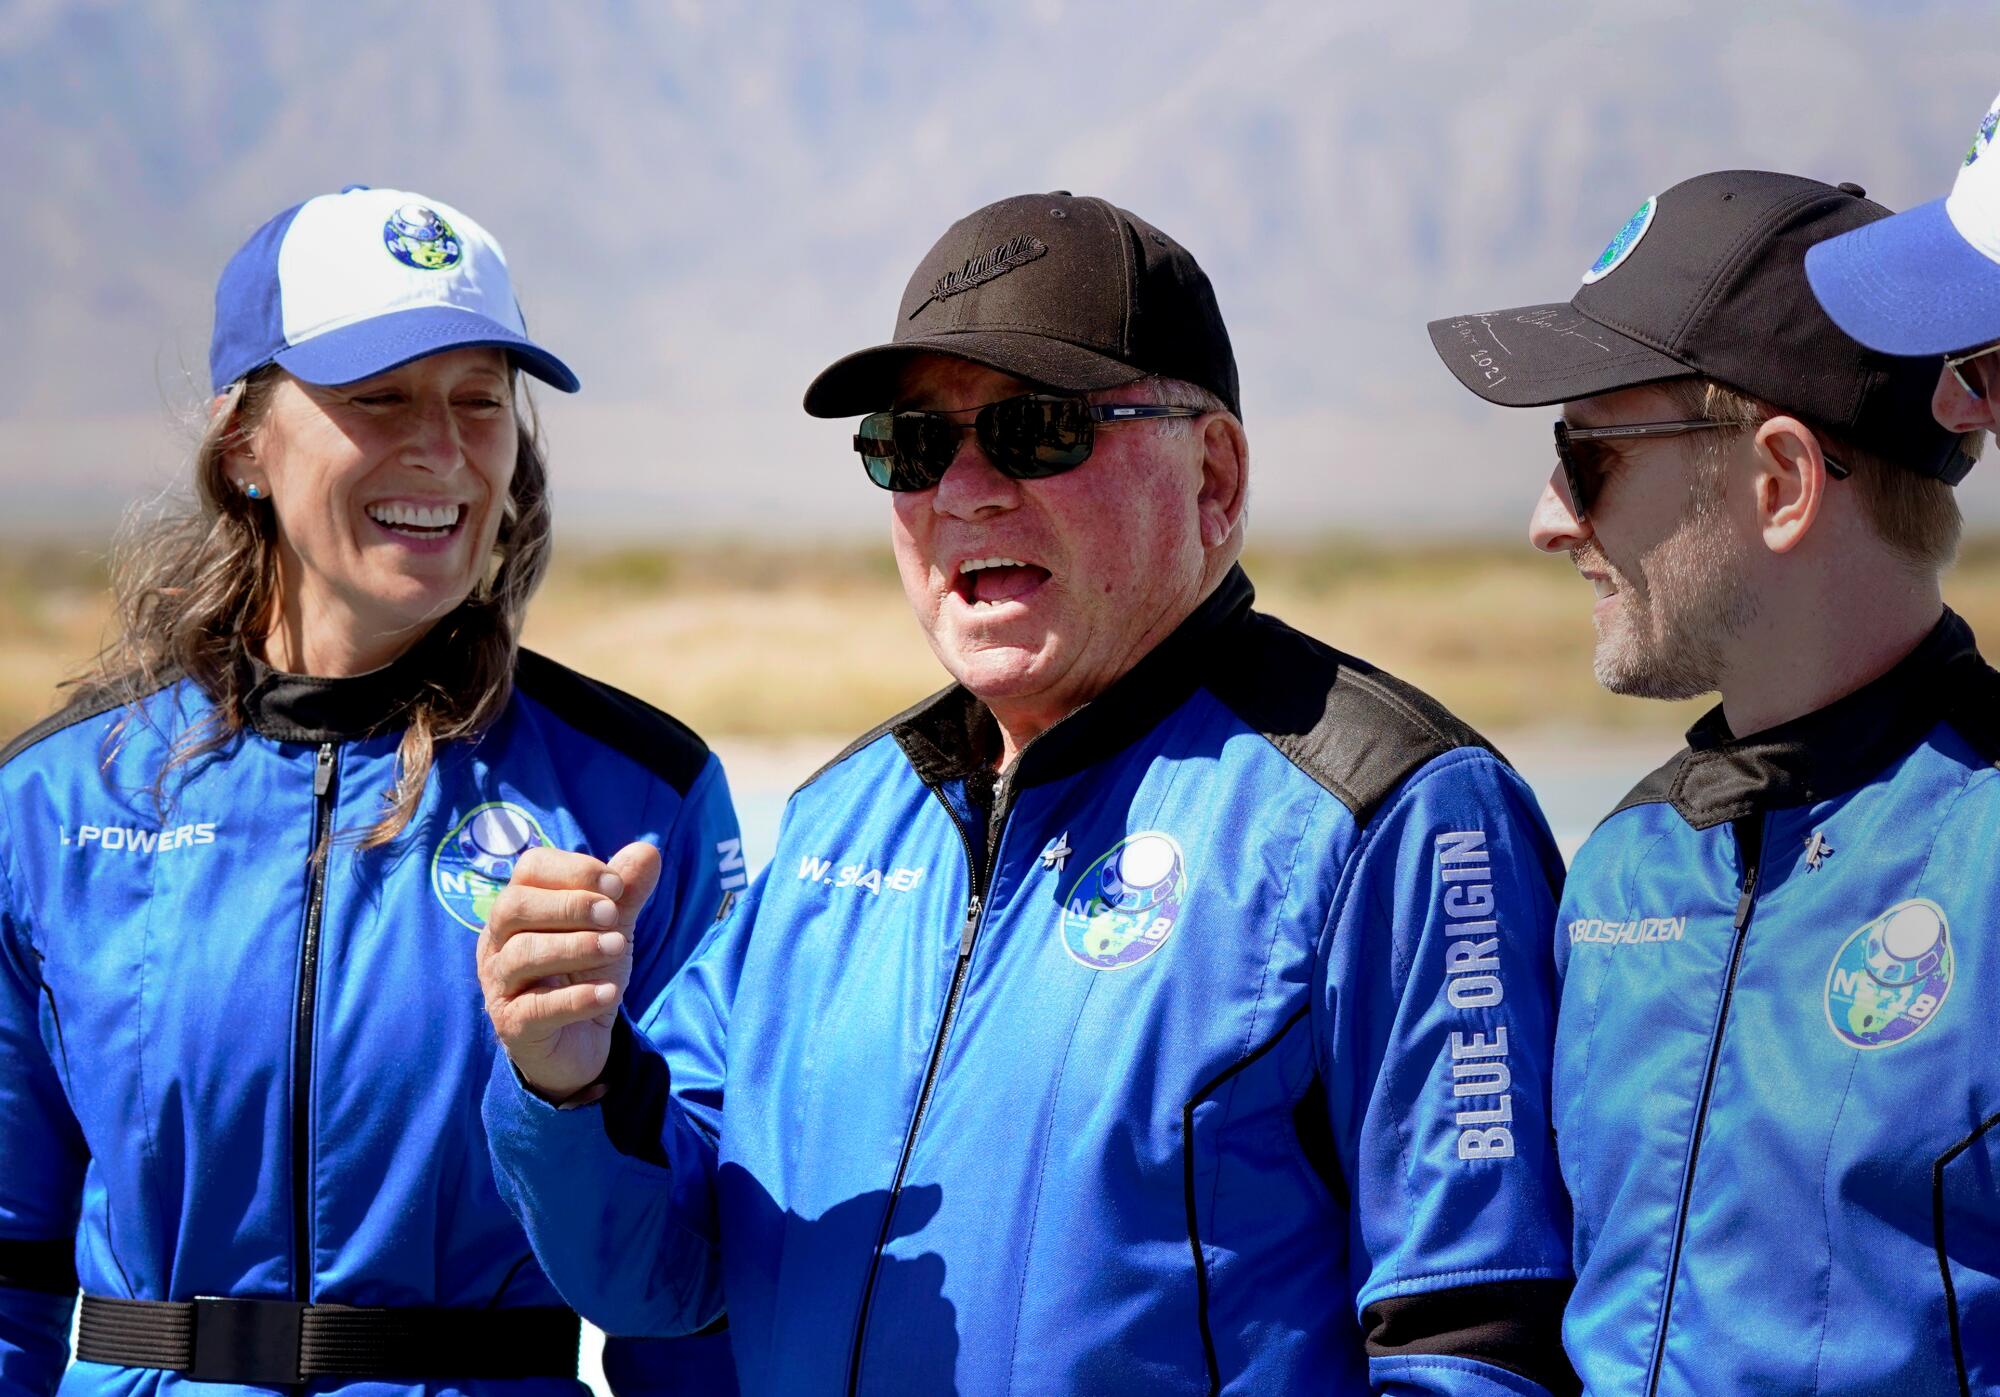 Three people in blue flight suits and baseball caps.